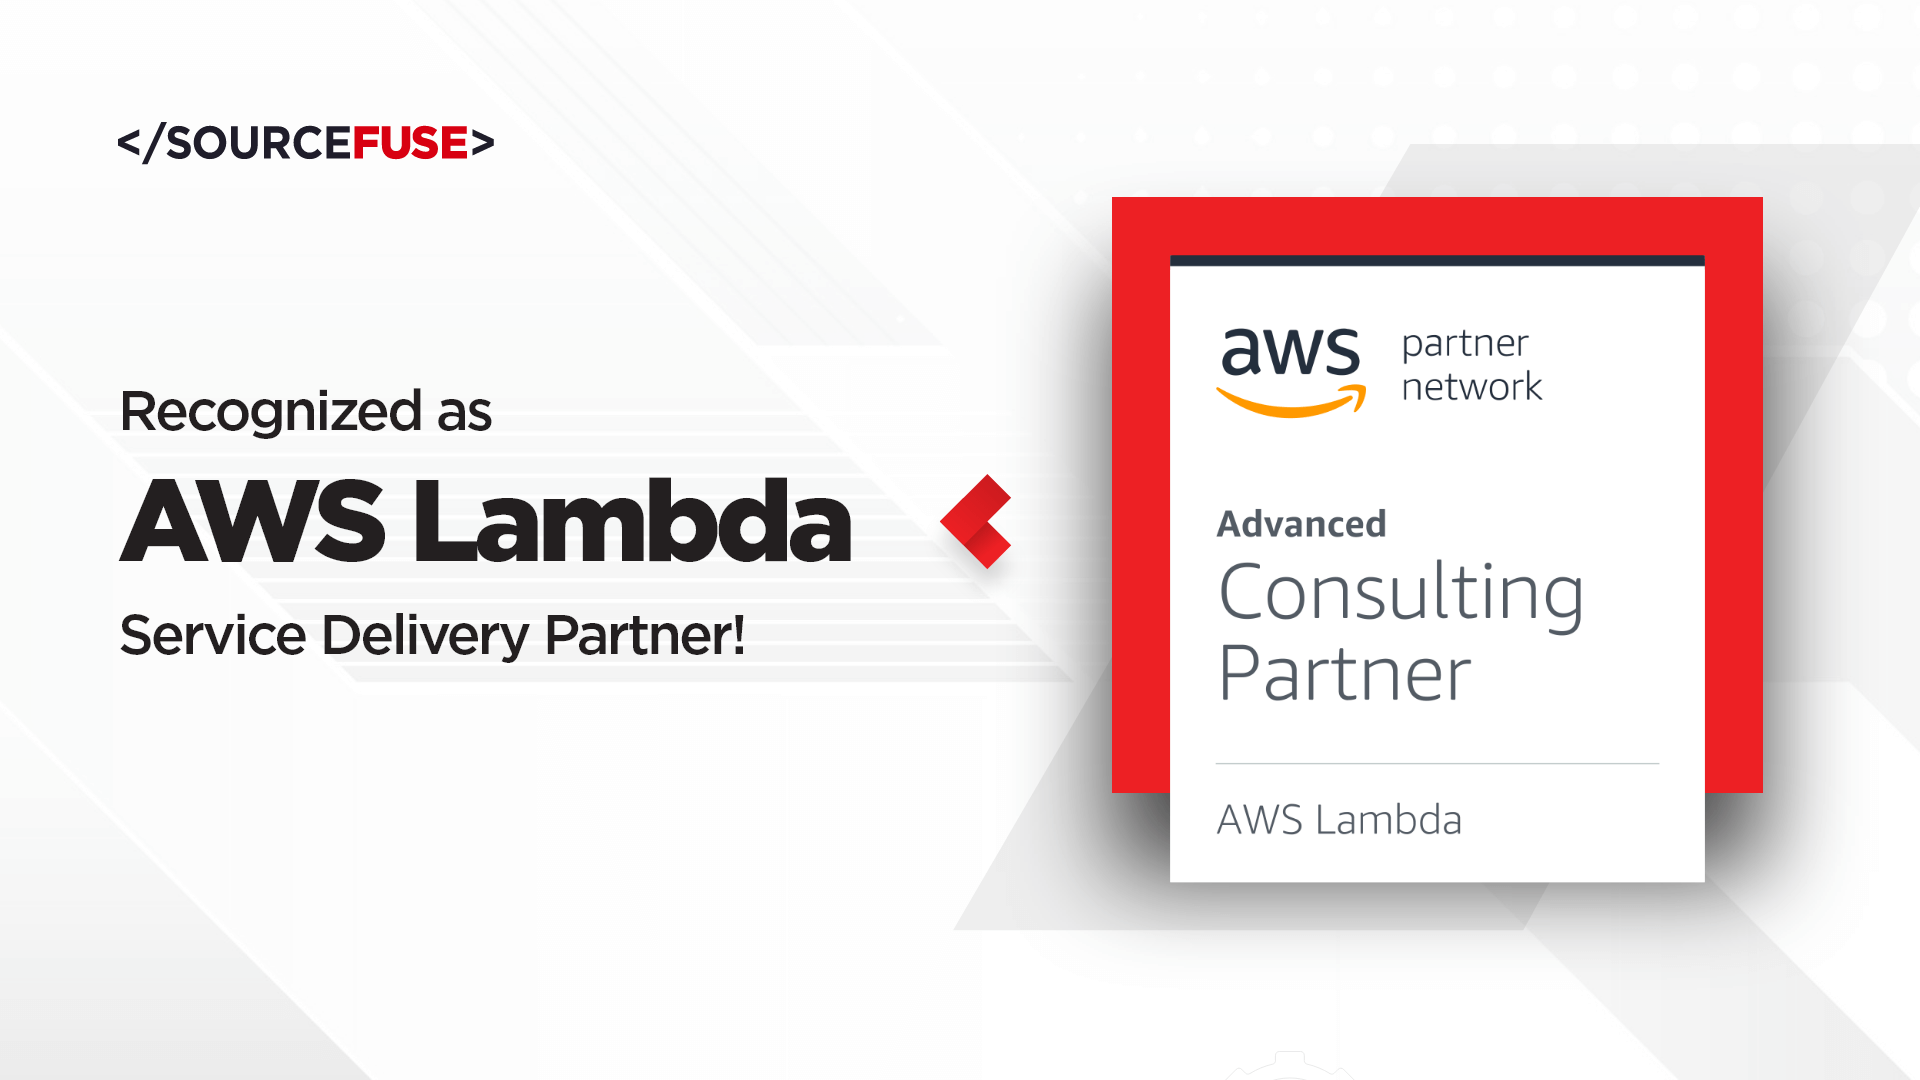 SourceFuse recognized as AWS Lambda Service Delivery Partners